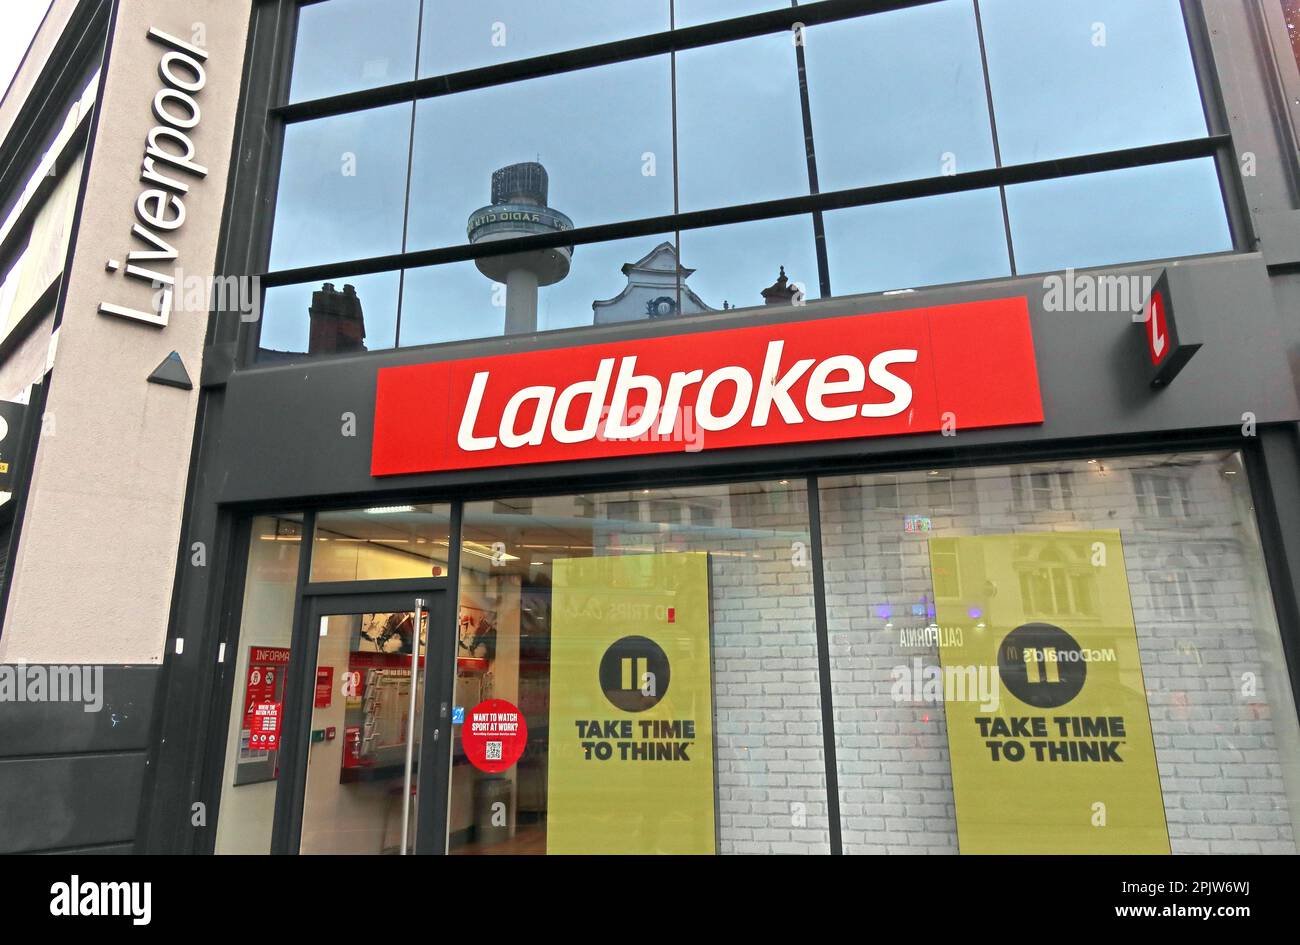 Take Time To think - Ladbrokes branch, Unit 19, Central Station Shopping Centre, 26 Ranelagh St, Liverpool, Merseyside, England, L1 1QE Stock Photo